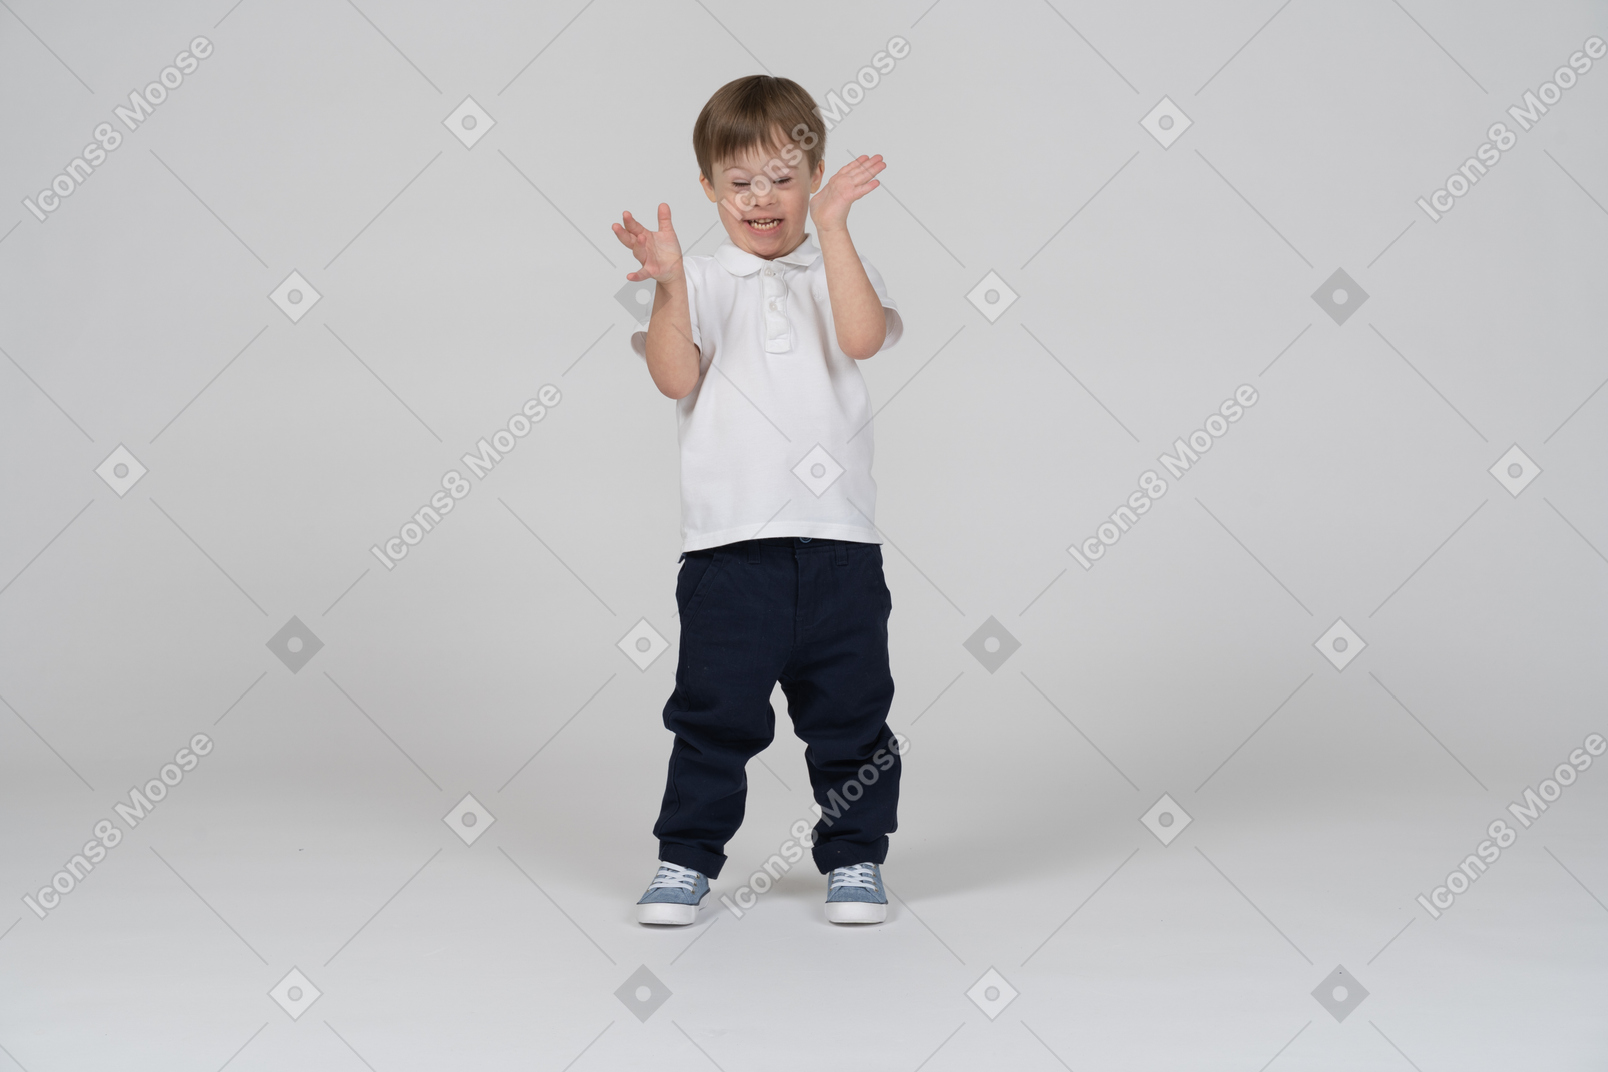 Front view of a boy smiling and gesturing excitedly with his hands